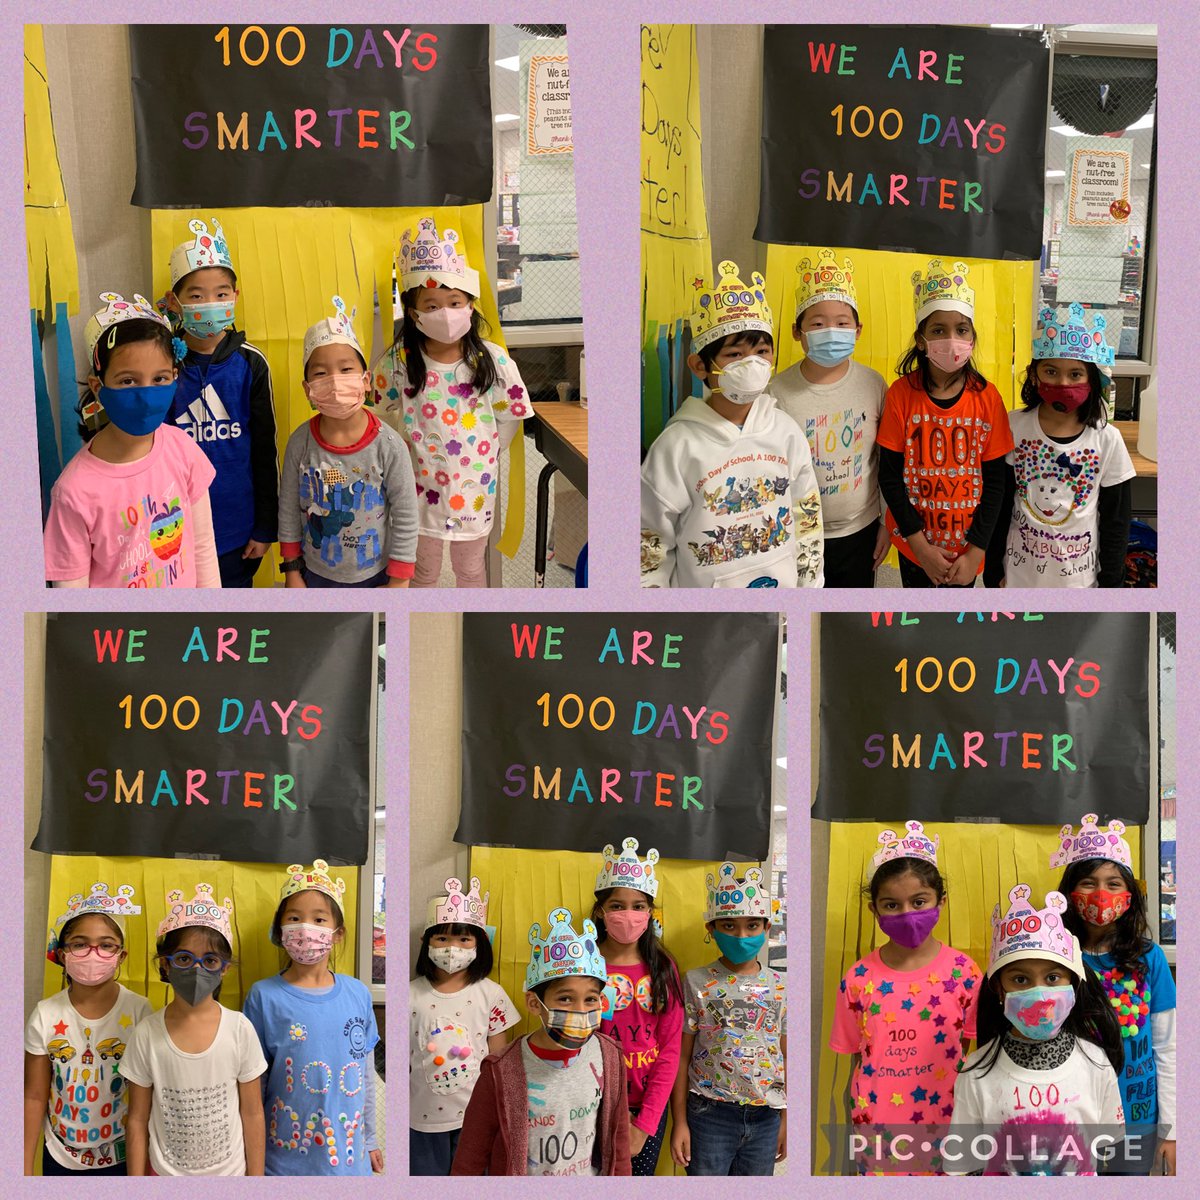 Our class is 100 Days Smarter! Celebrating the 100th day of school ⁦@MrsRPatelCWE⁩ ⁦@CWE_Cougars⁩